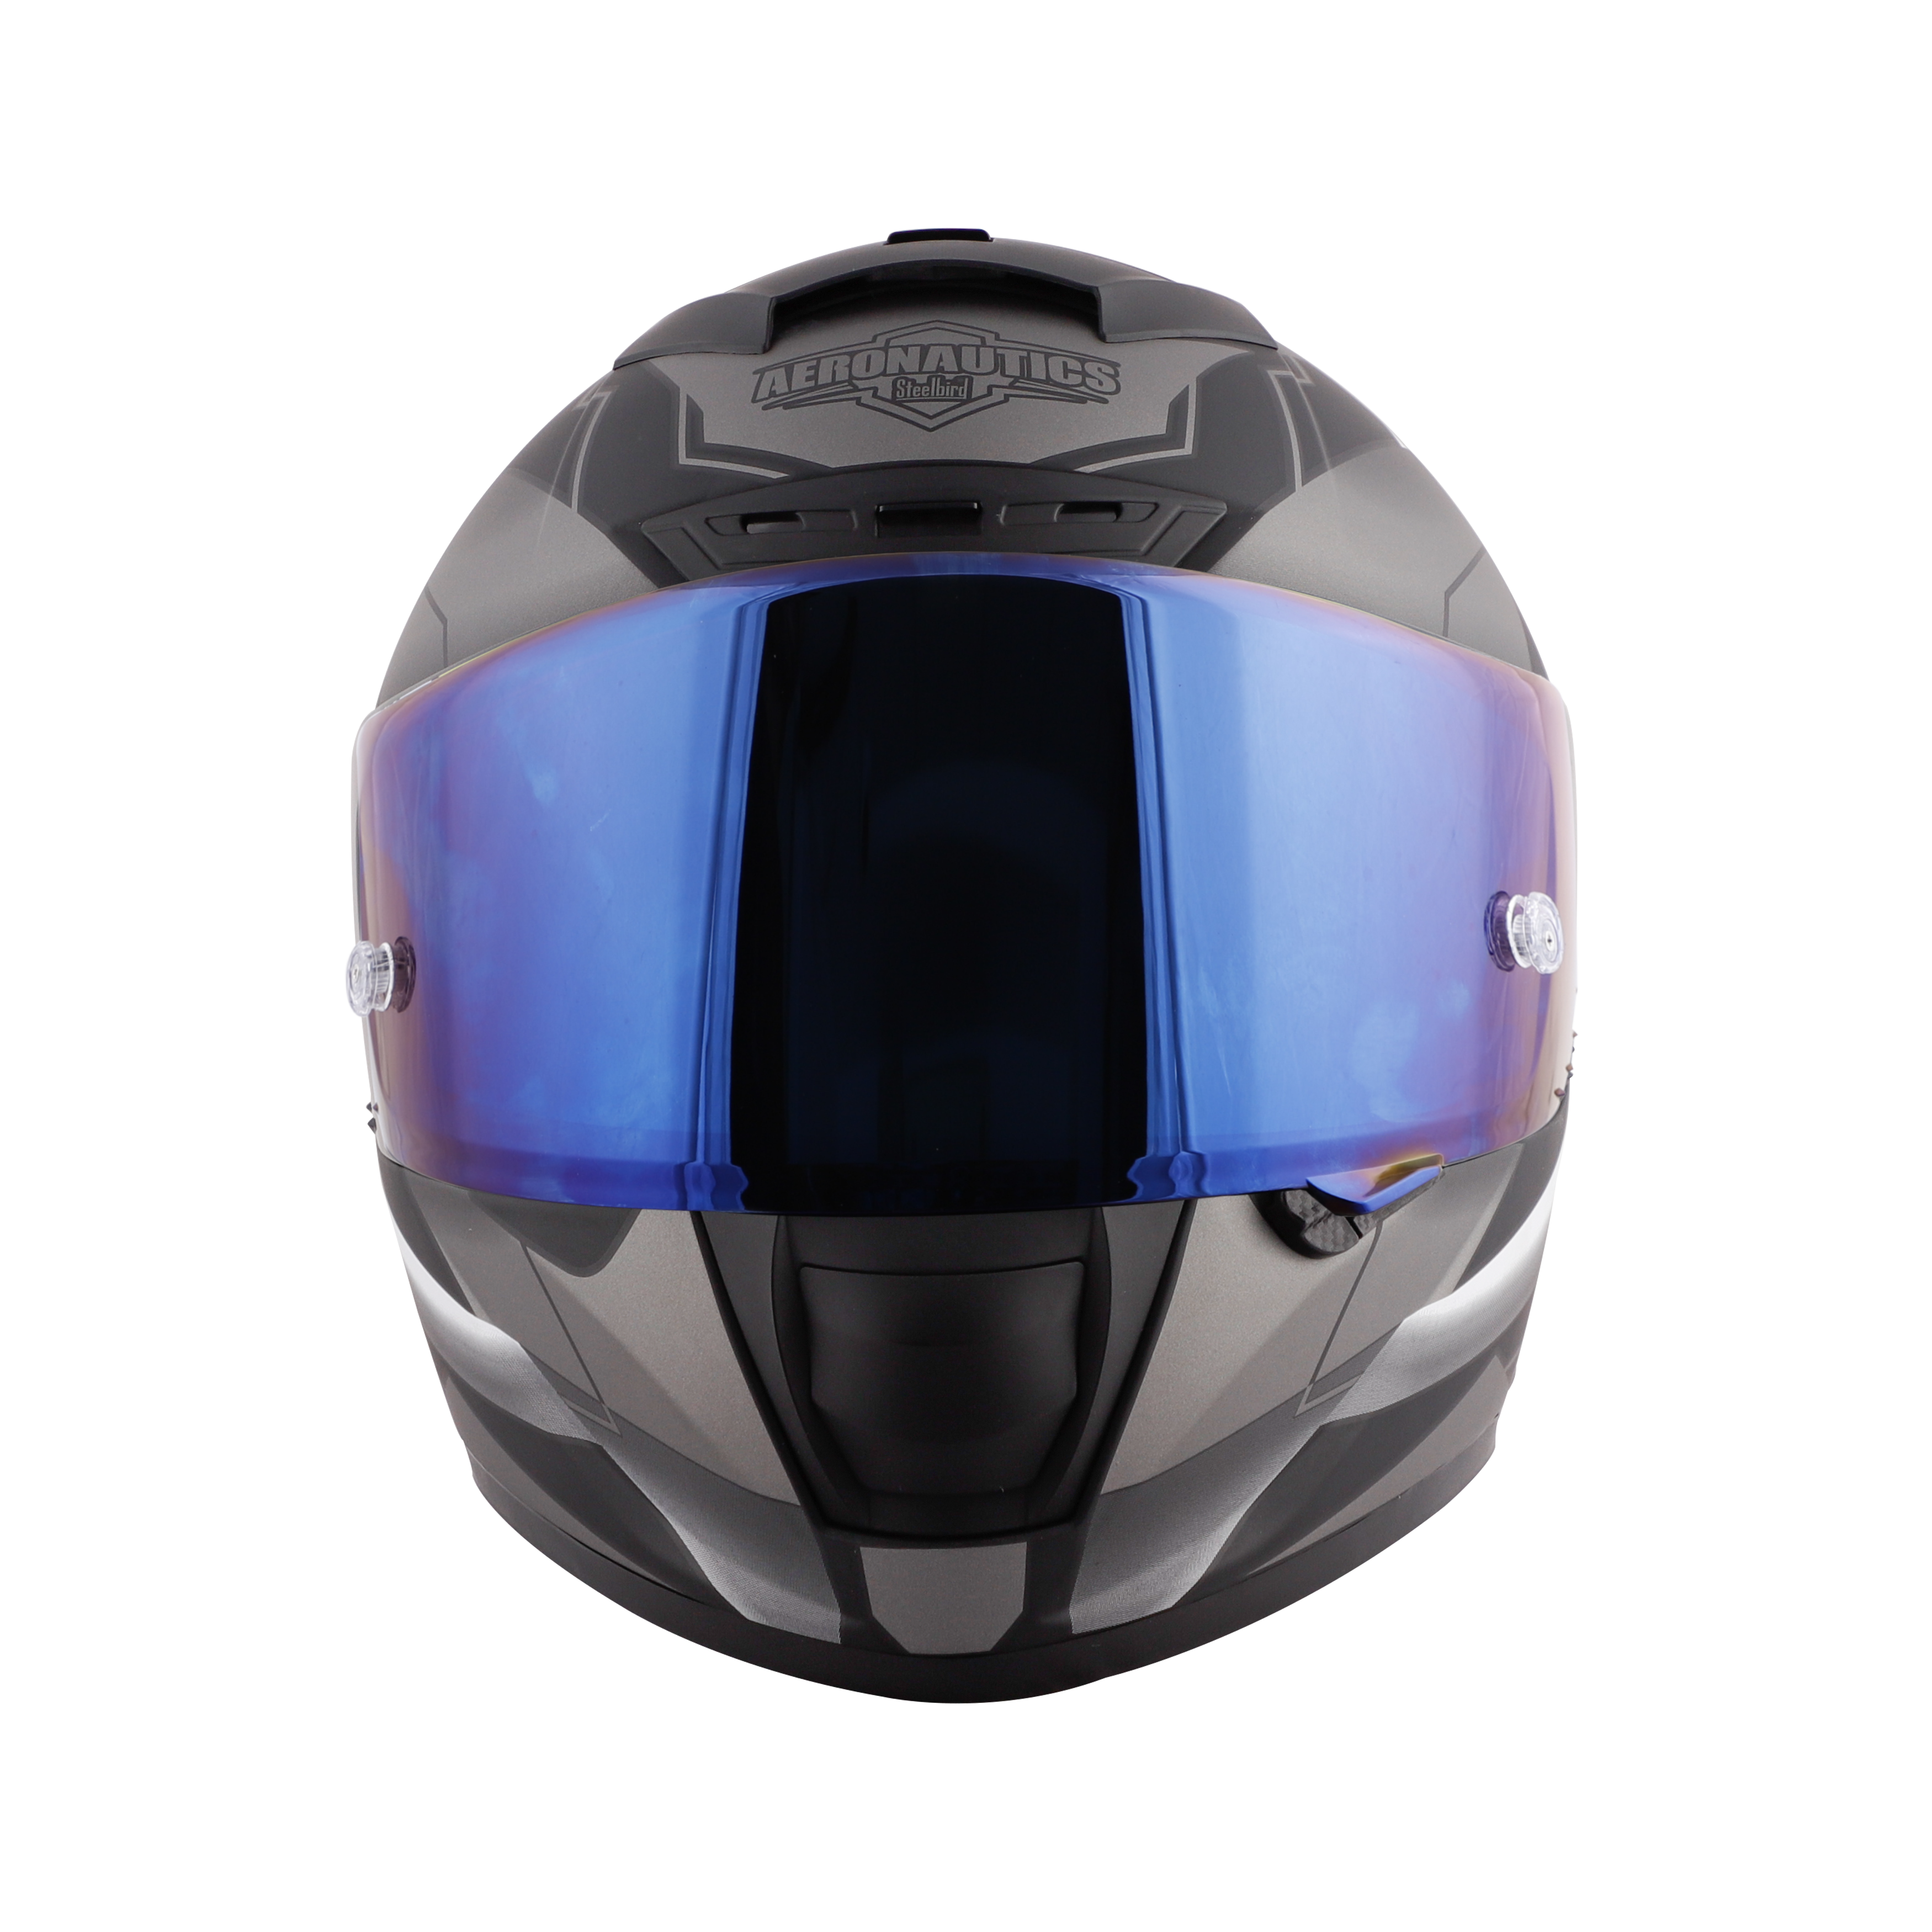 SA-2 METALLIC GLOSSY BLACK WITH GREY ( FITTED WITH CLEAR VISOR  EXTRA CHROME BLUE VISOR FREE) WITH ANTI-FOG SHIELD HOLDER